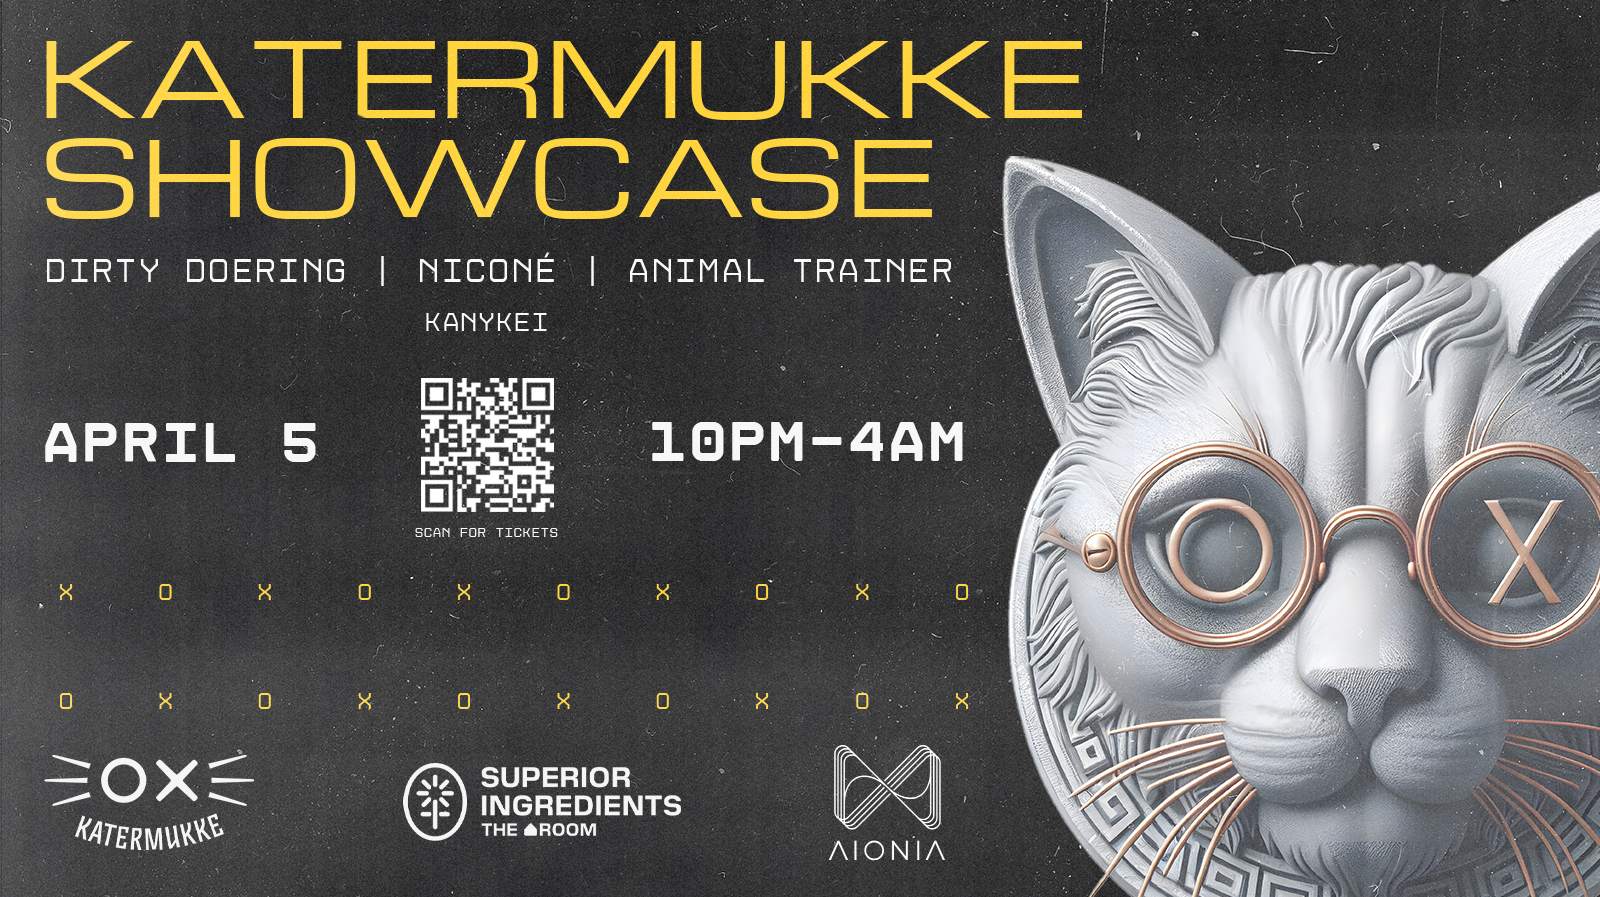 AIONIA: NYC Katermukke Showcase with Dirty Doering, Nicone, Animal Trainer **TICKETS ===>> DICE** - Página frontal